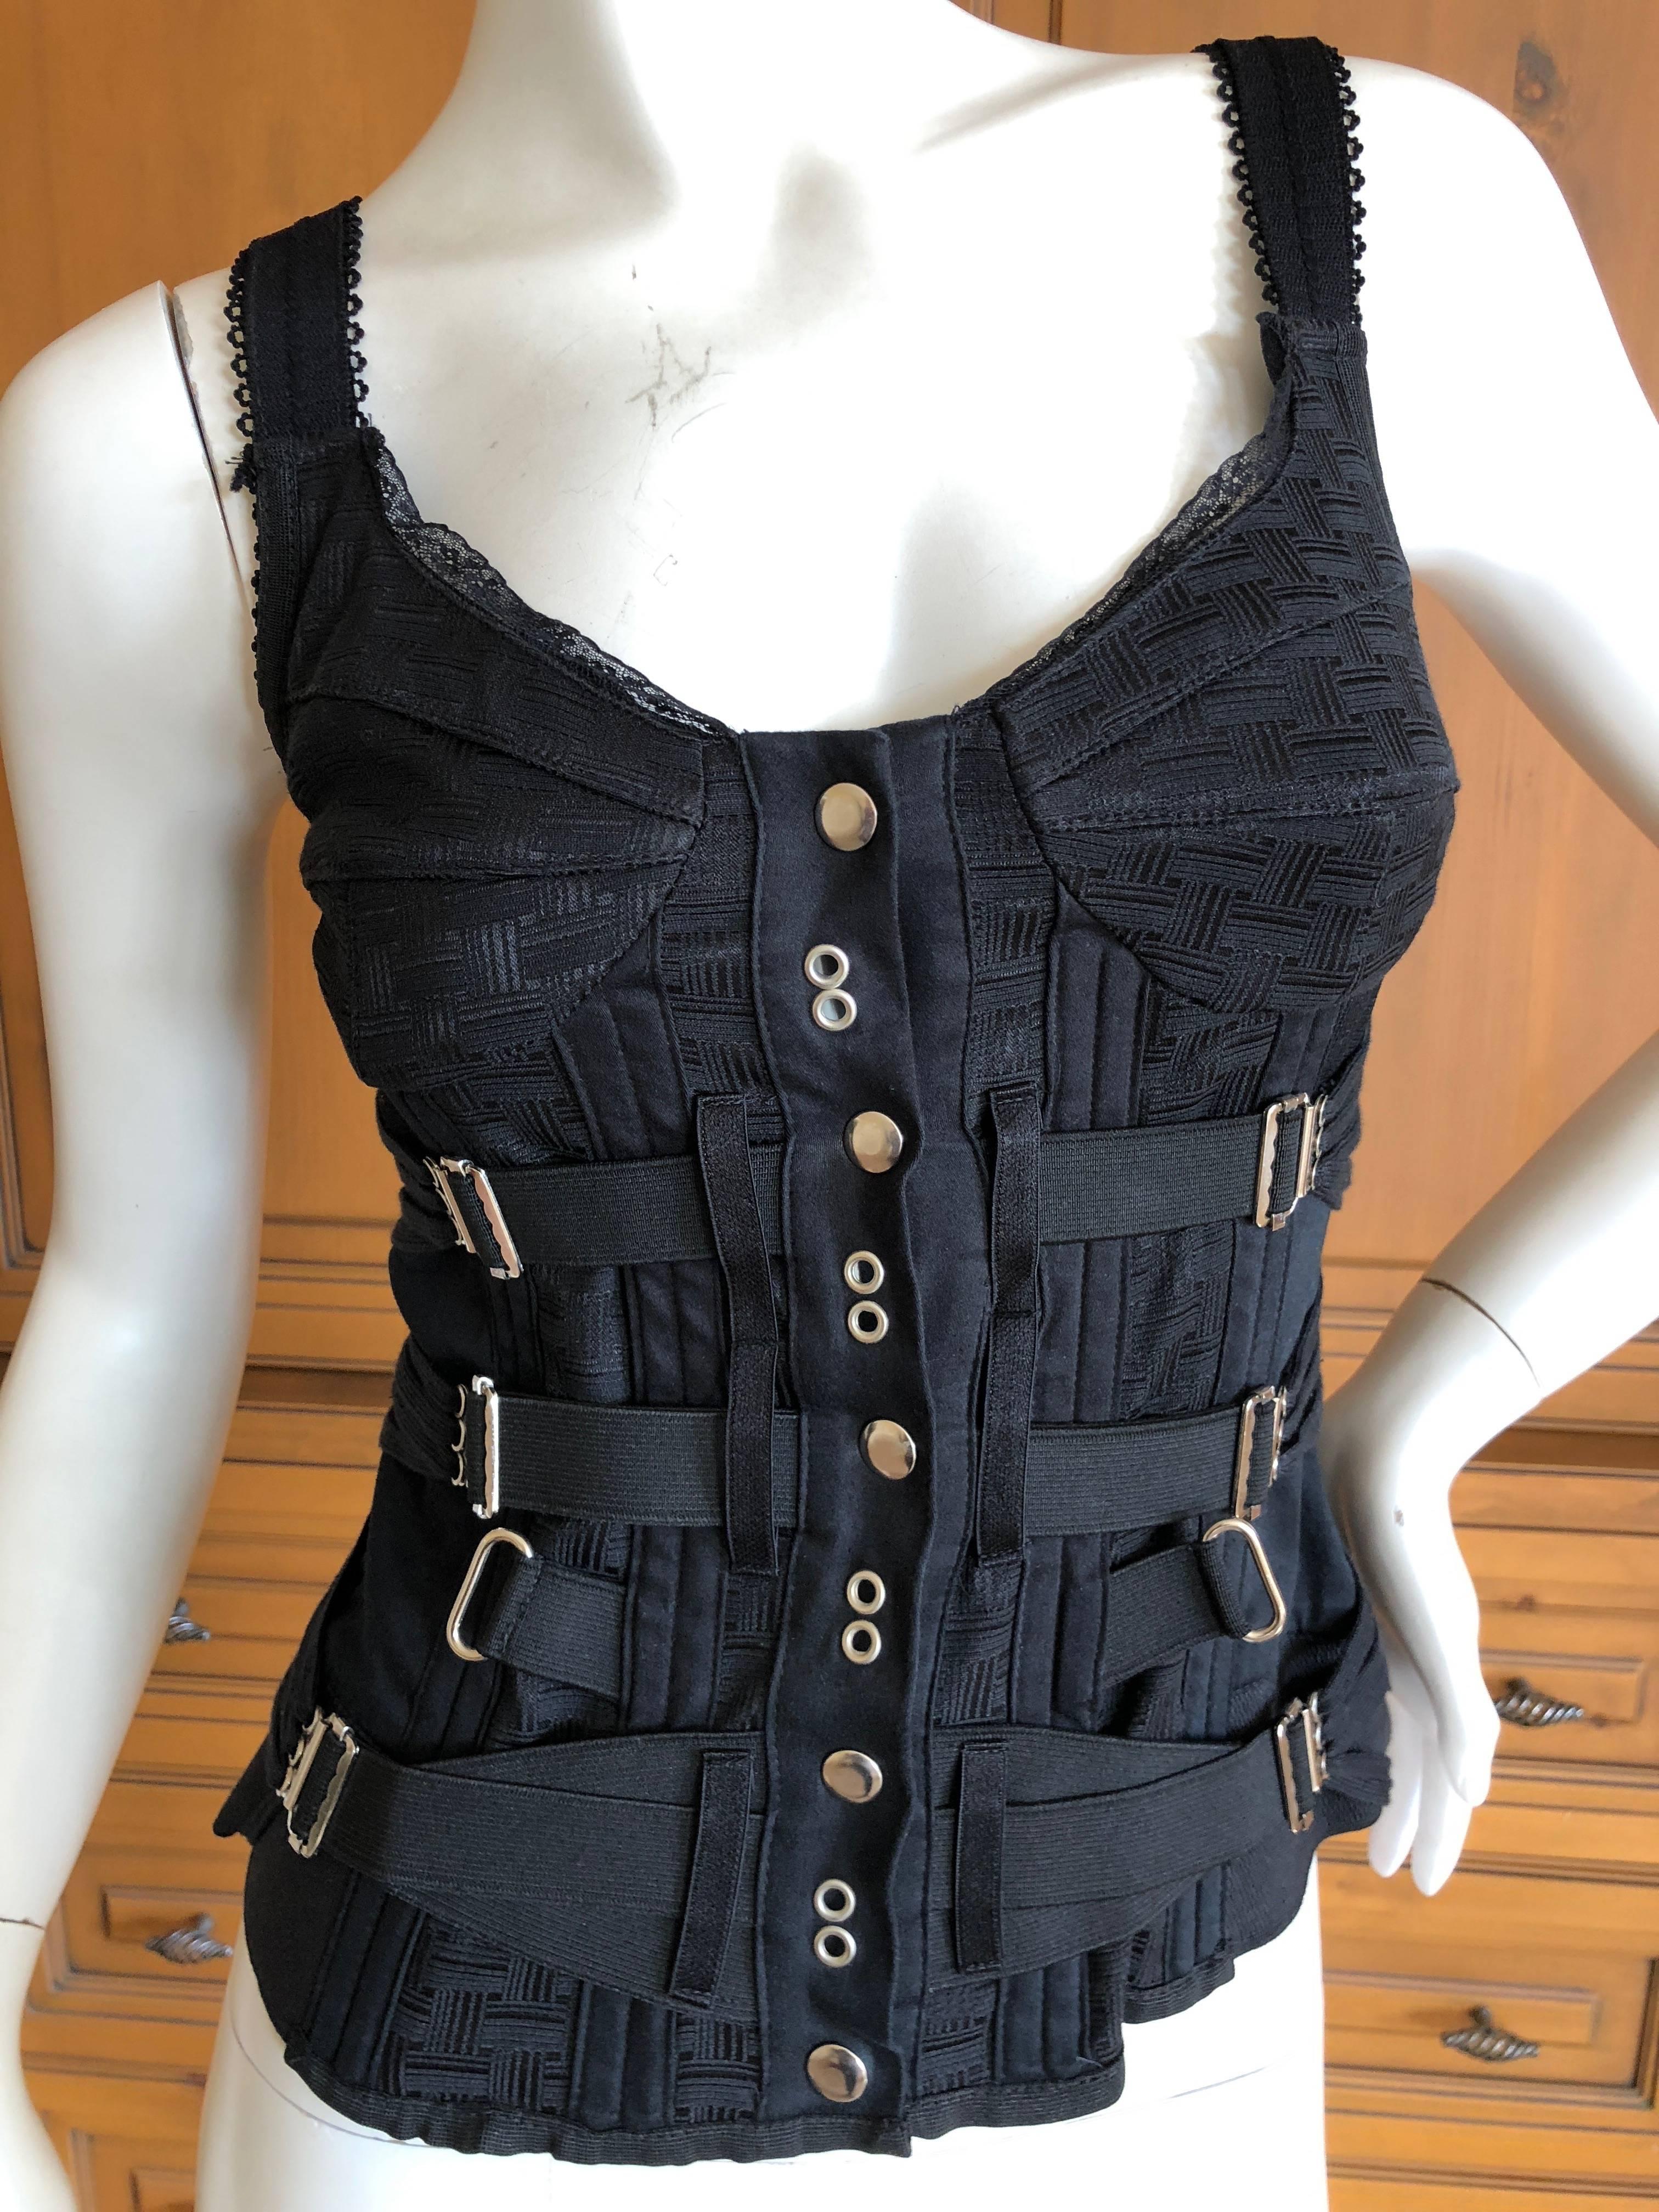 Dolce & Gabbana D&G Vintage Black Bondage Strap Bustier Top
There is  a lot of stretch, it snaps up the front.
Size 38
Bust 34